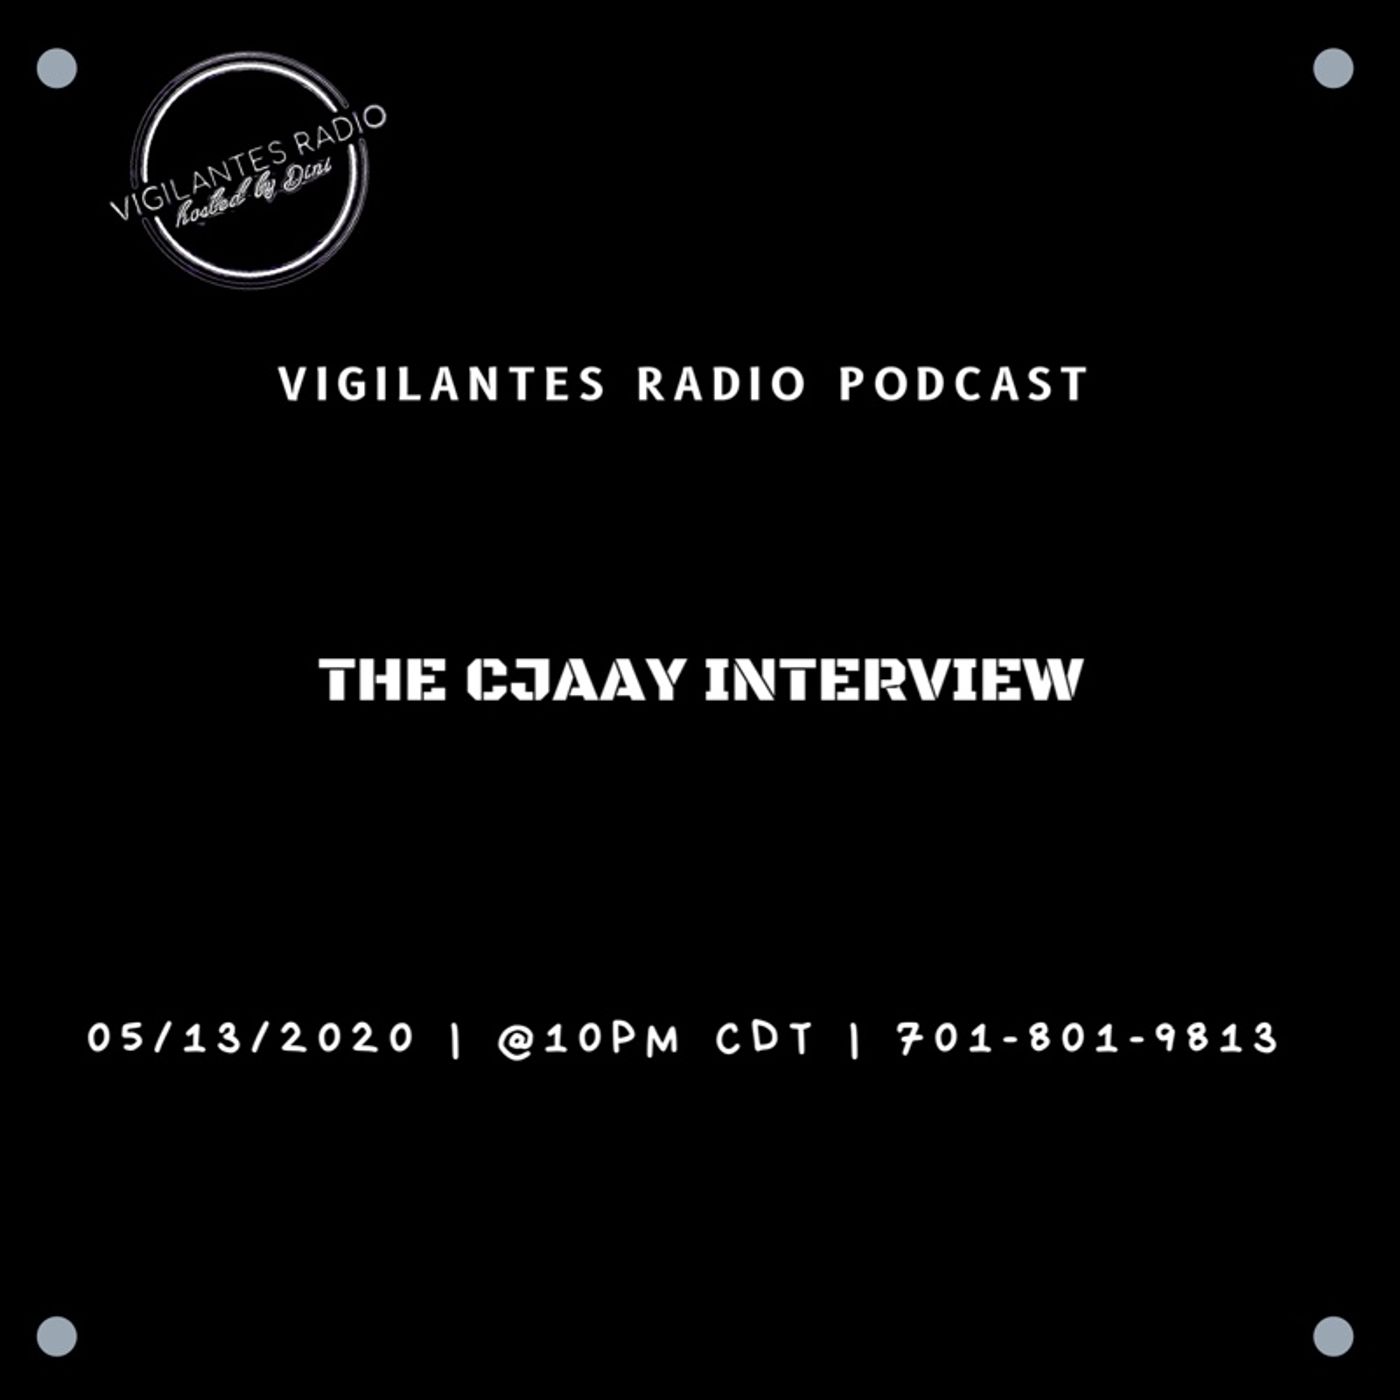 The Cjaay Interview. Image